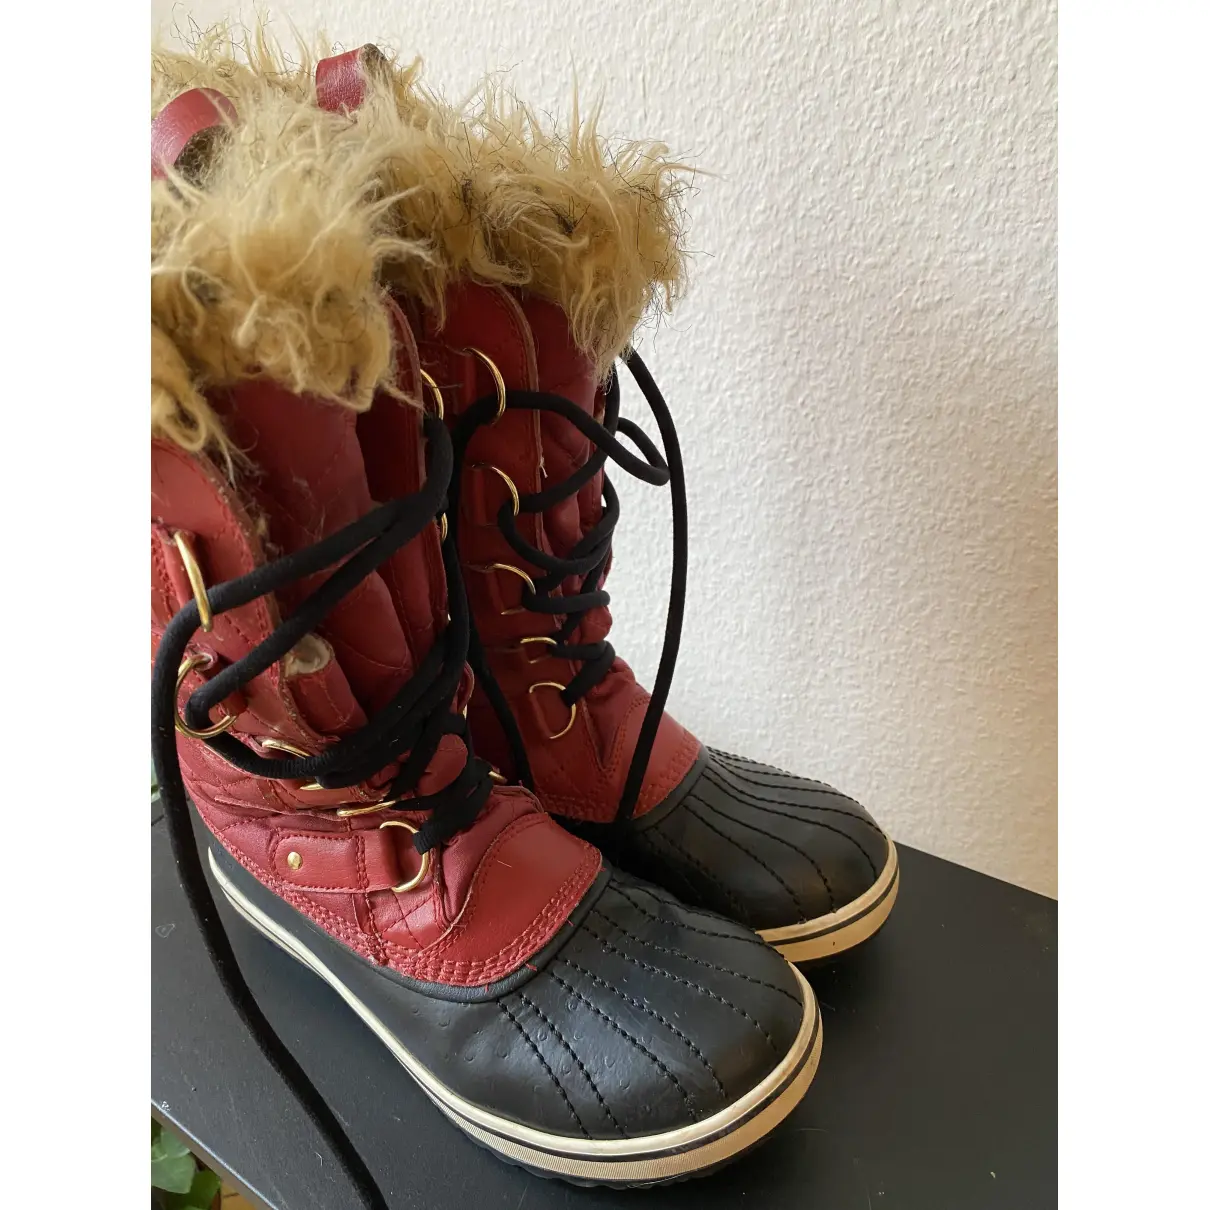 Buy Sorel Leather boots online